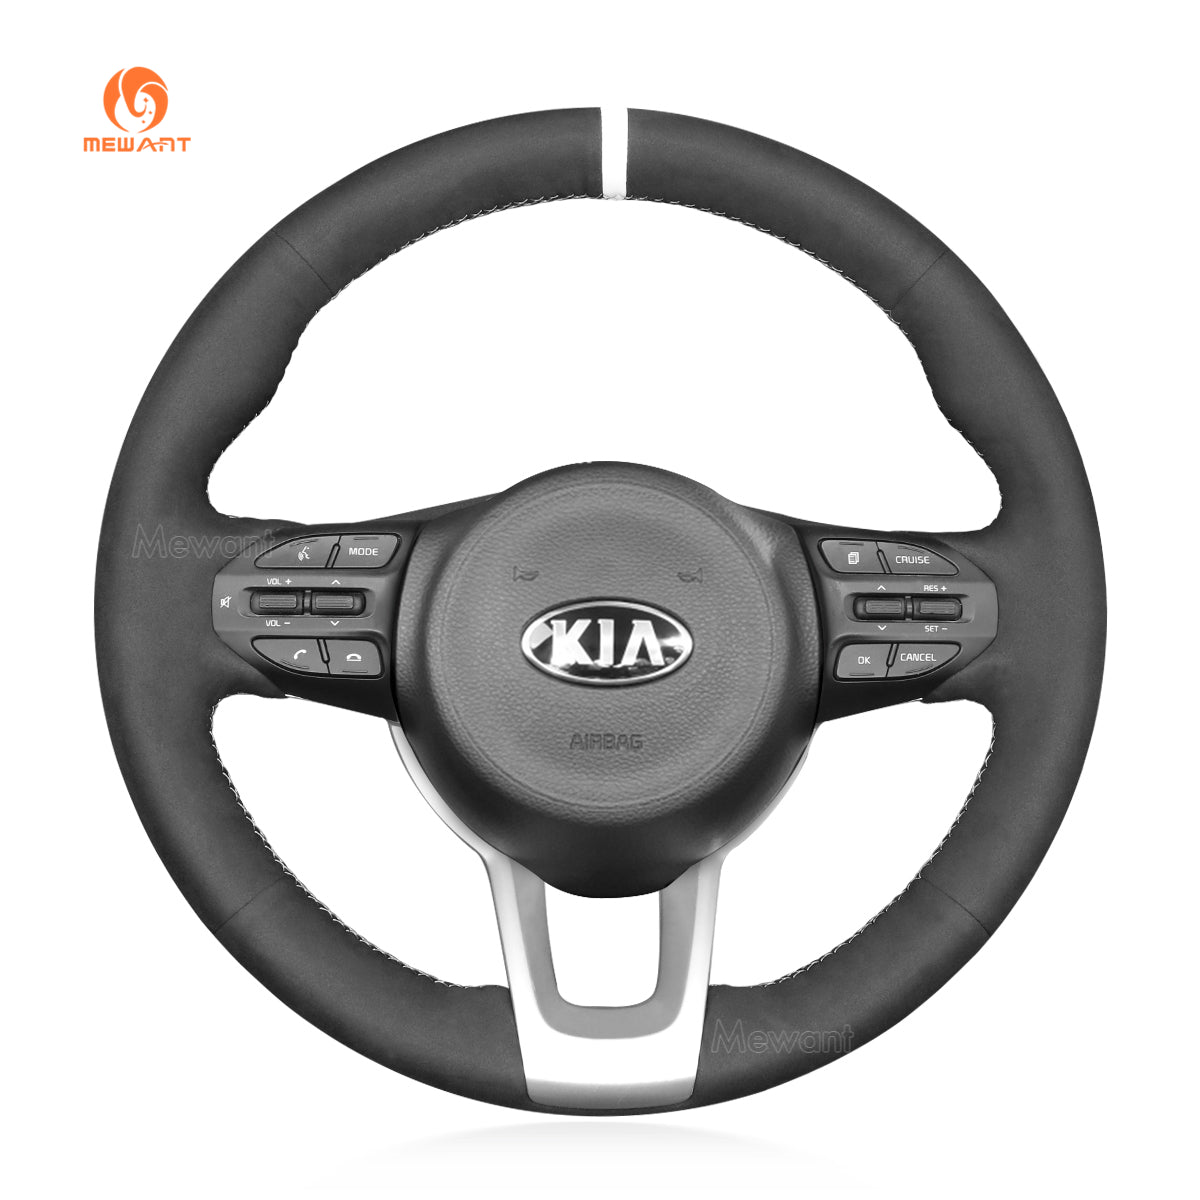 MEWANT Leather Suede Material Car Steering Wheel Cover for Kia Rio 2017-2019 / Rio5 2019 / K2 2017-2019 / Picanto 2017-2019 / Morning 2017-2019